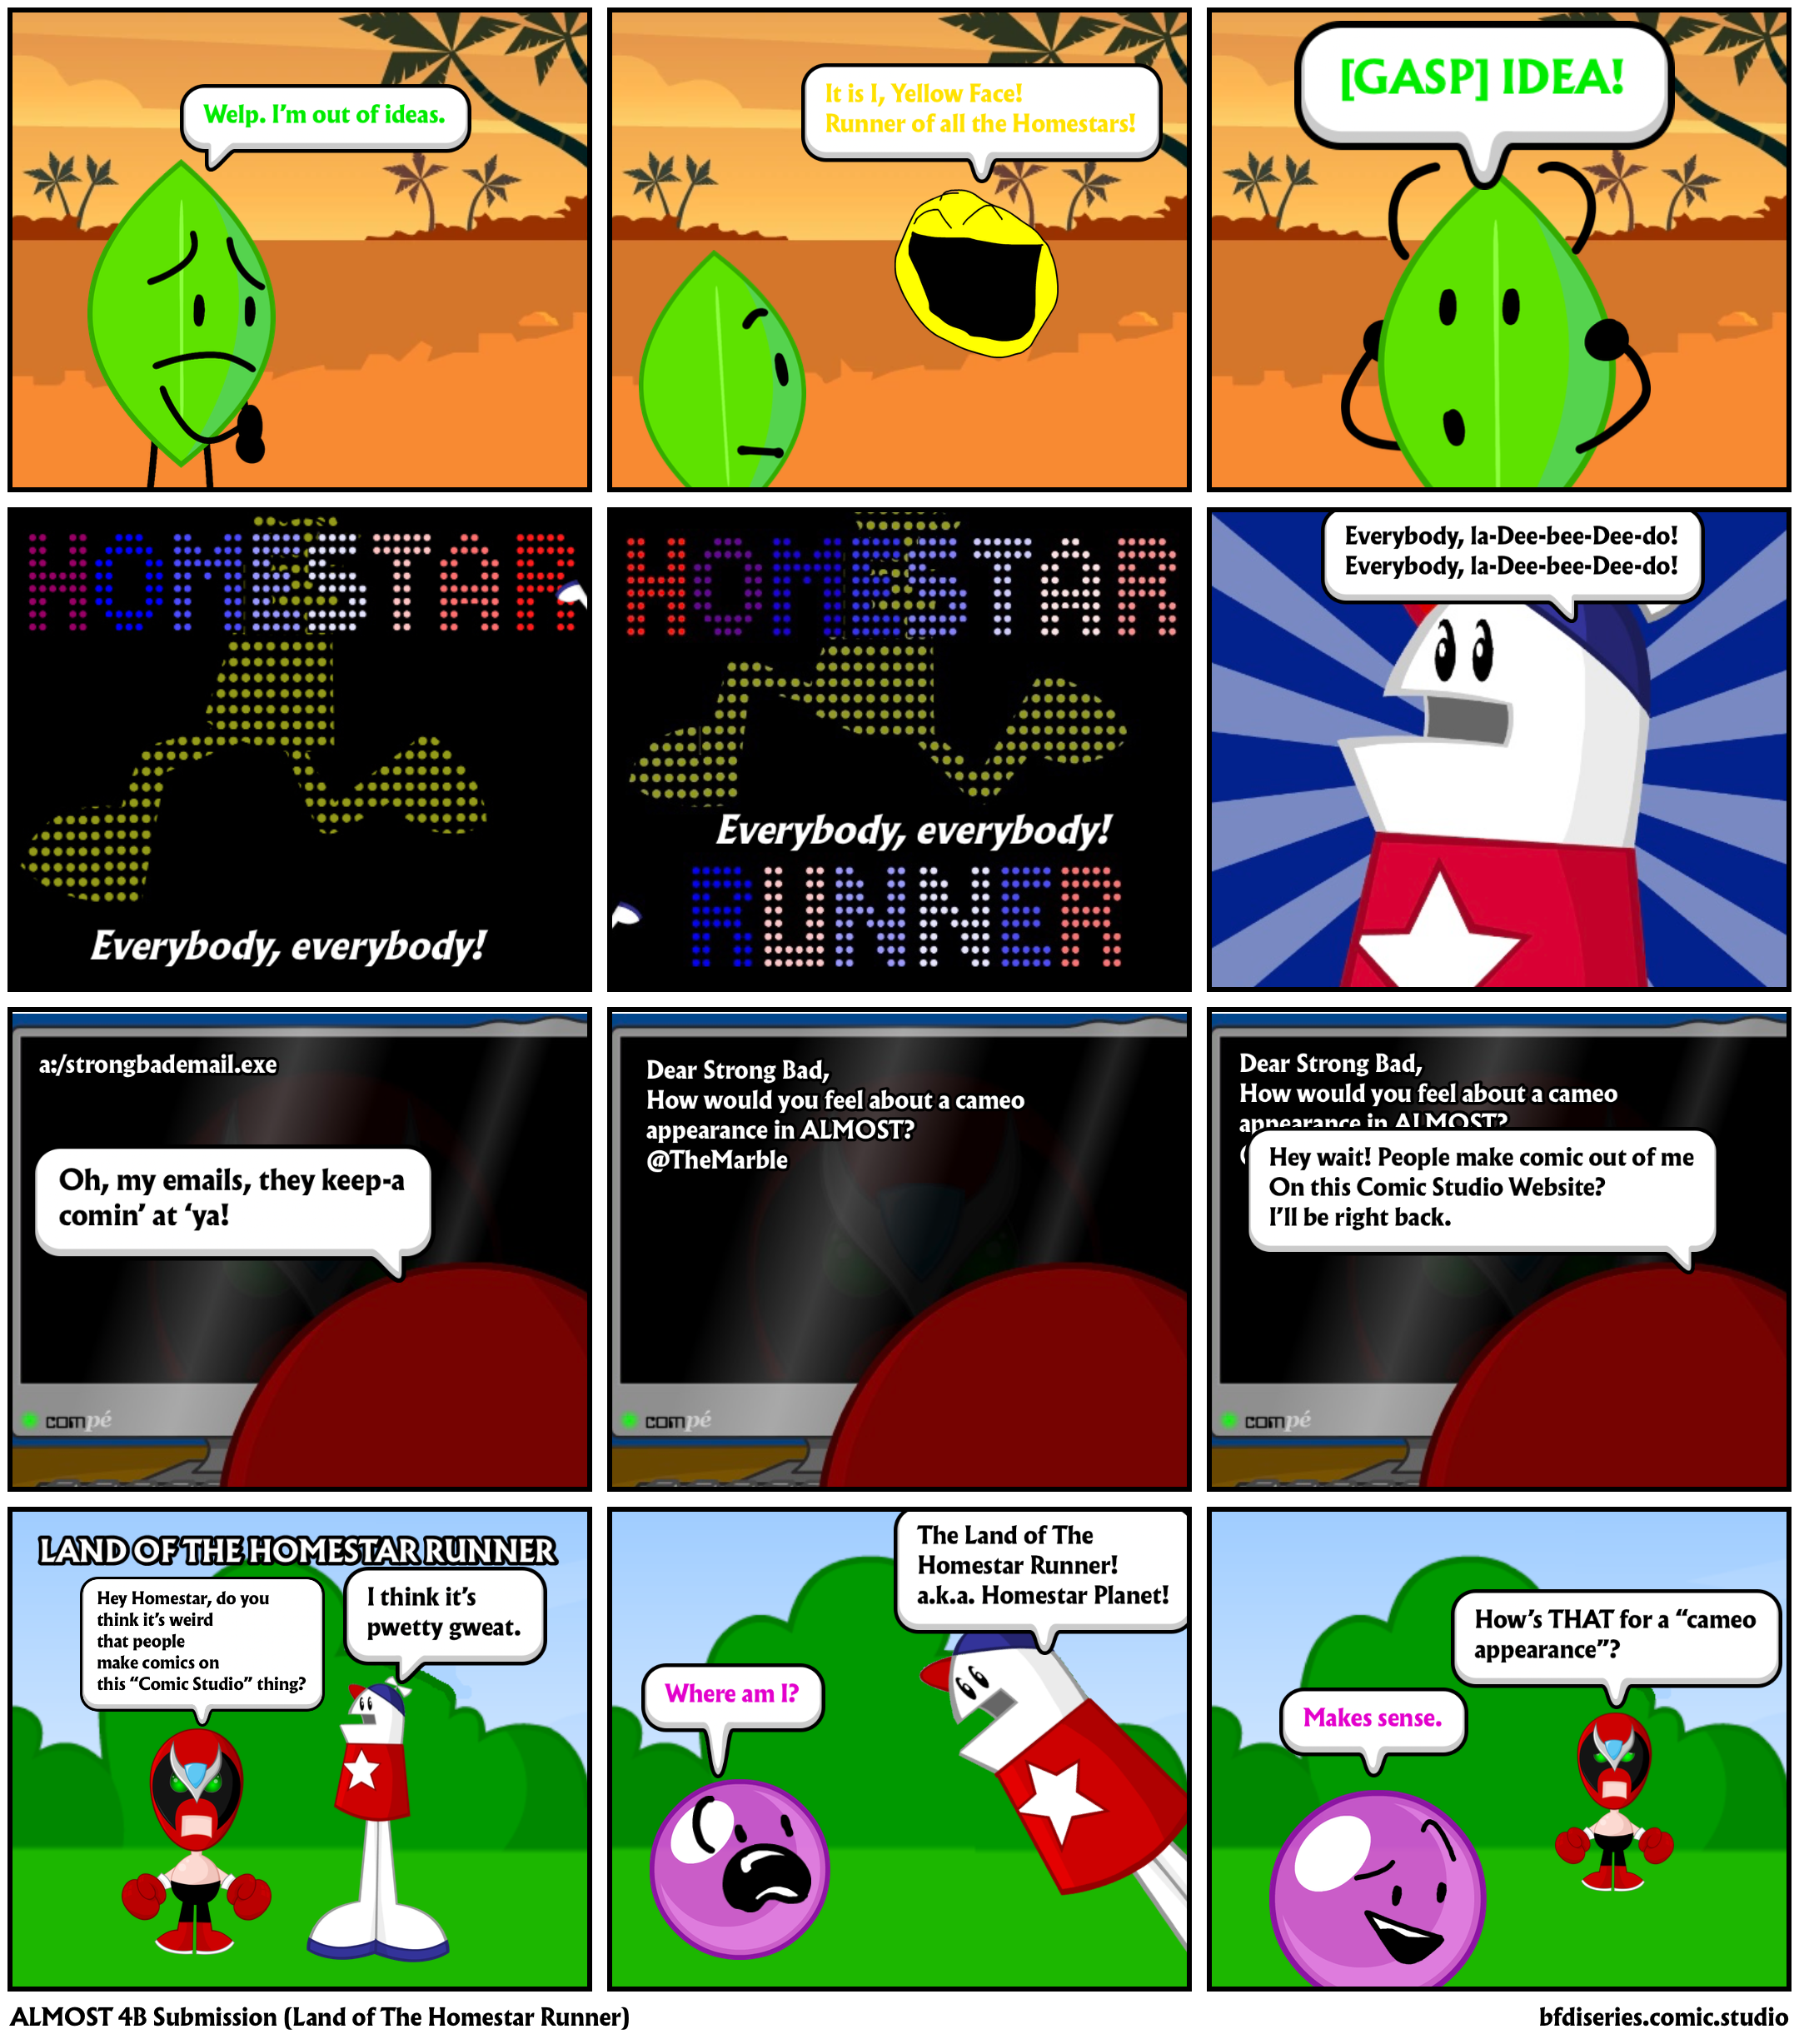 ALMOST 4B Submission (Land of The Homestar Runner)